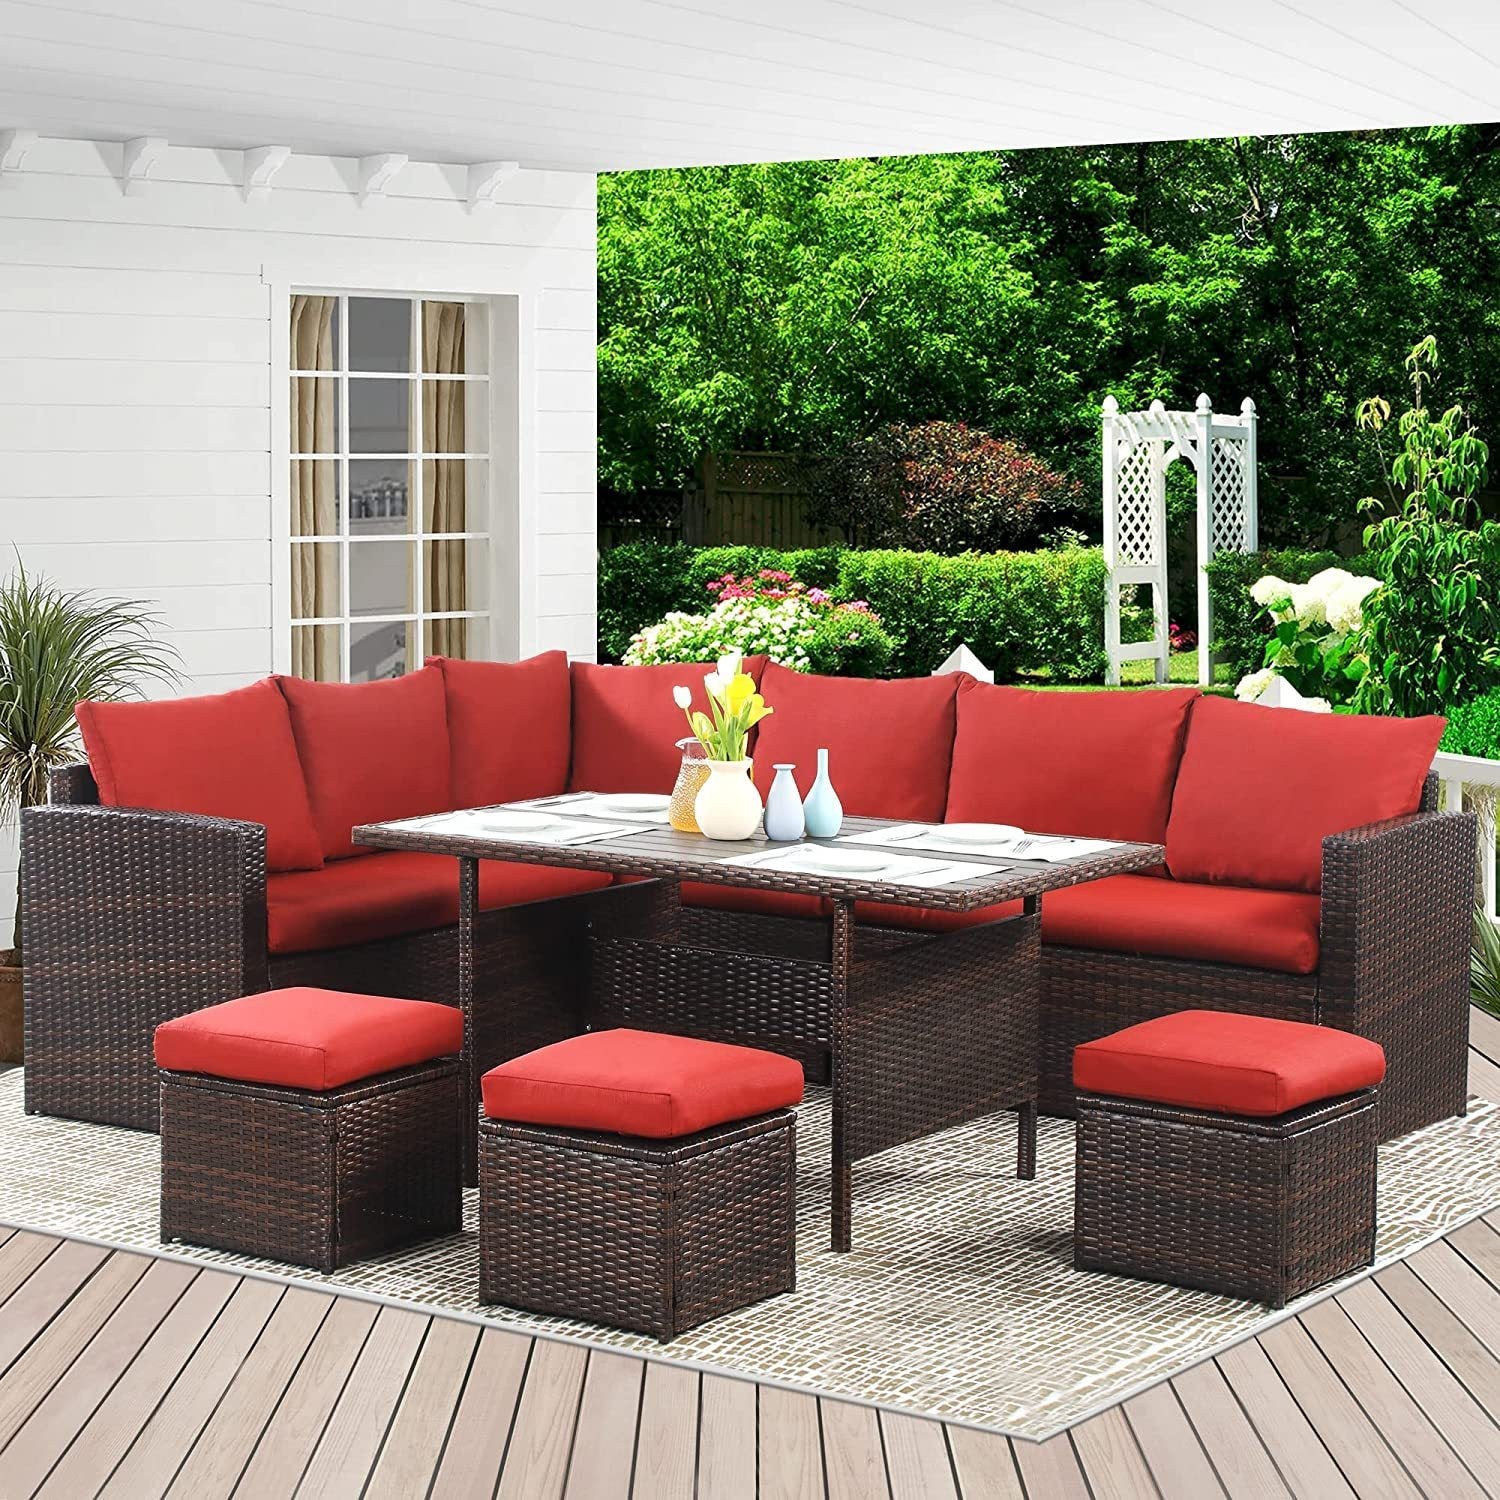 7-Pieces-PE-Rattan-Wicker-Patio-Dining-Sectional-Cusions-Sofa-Set-with-Red-cushions-Outdoor-Furniture-Sets